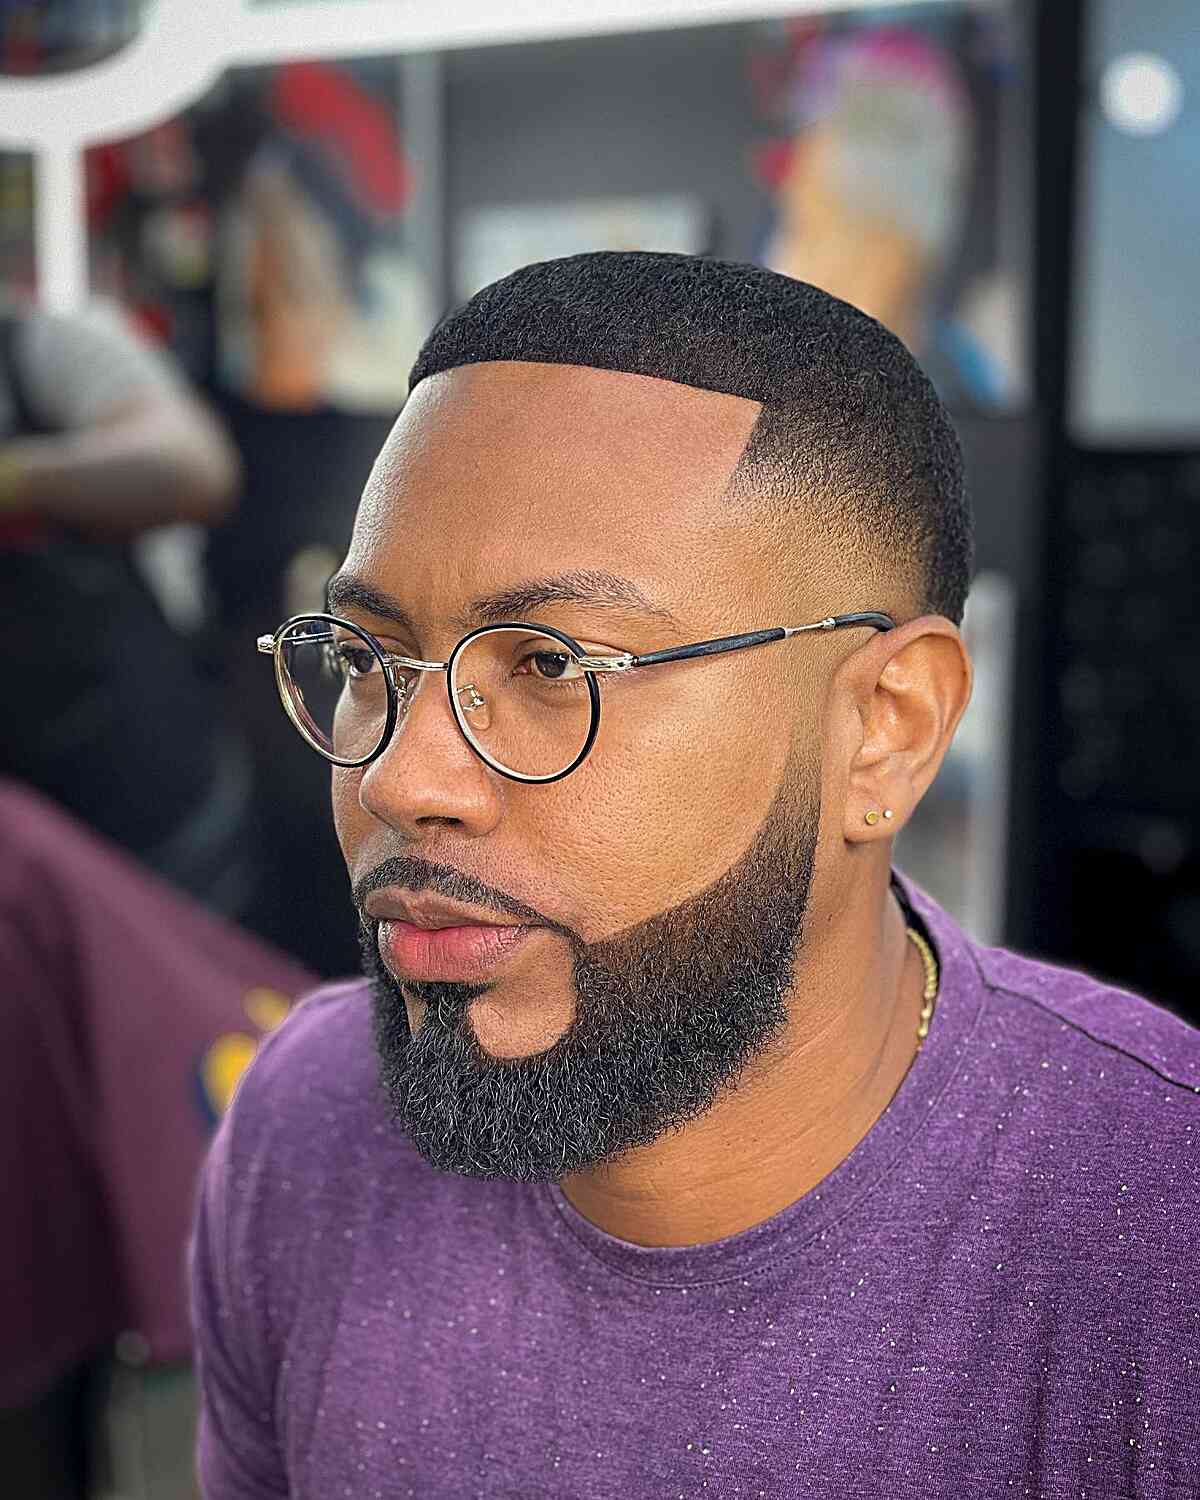 Beard Fade with a Fresh Line-Up for Black Men